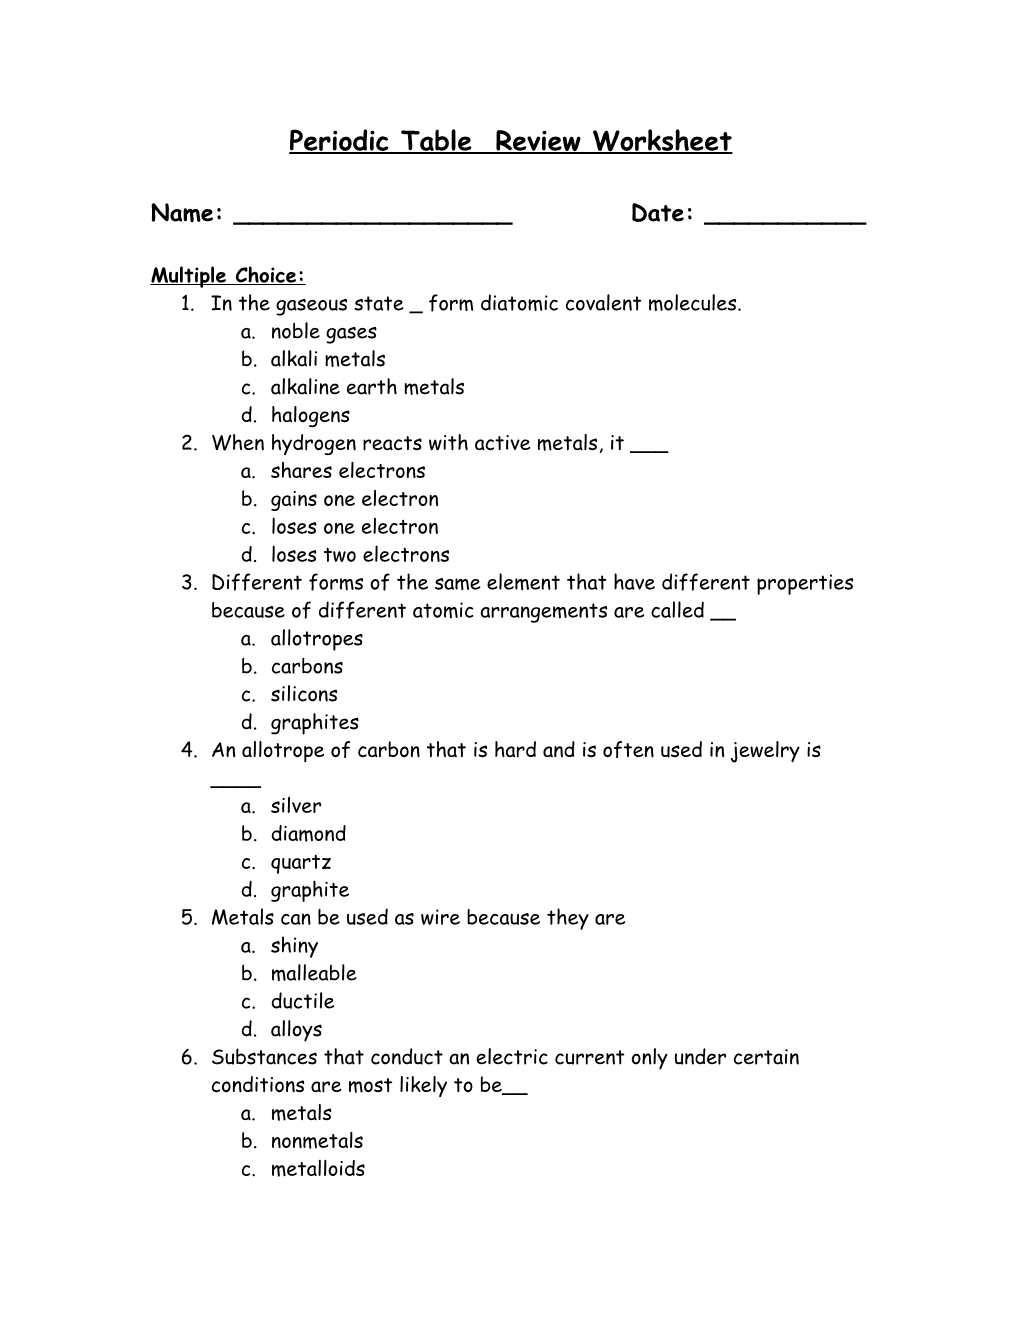 Chapter 20 Review Worksheet